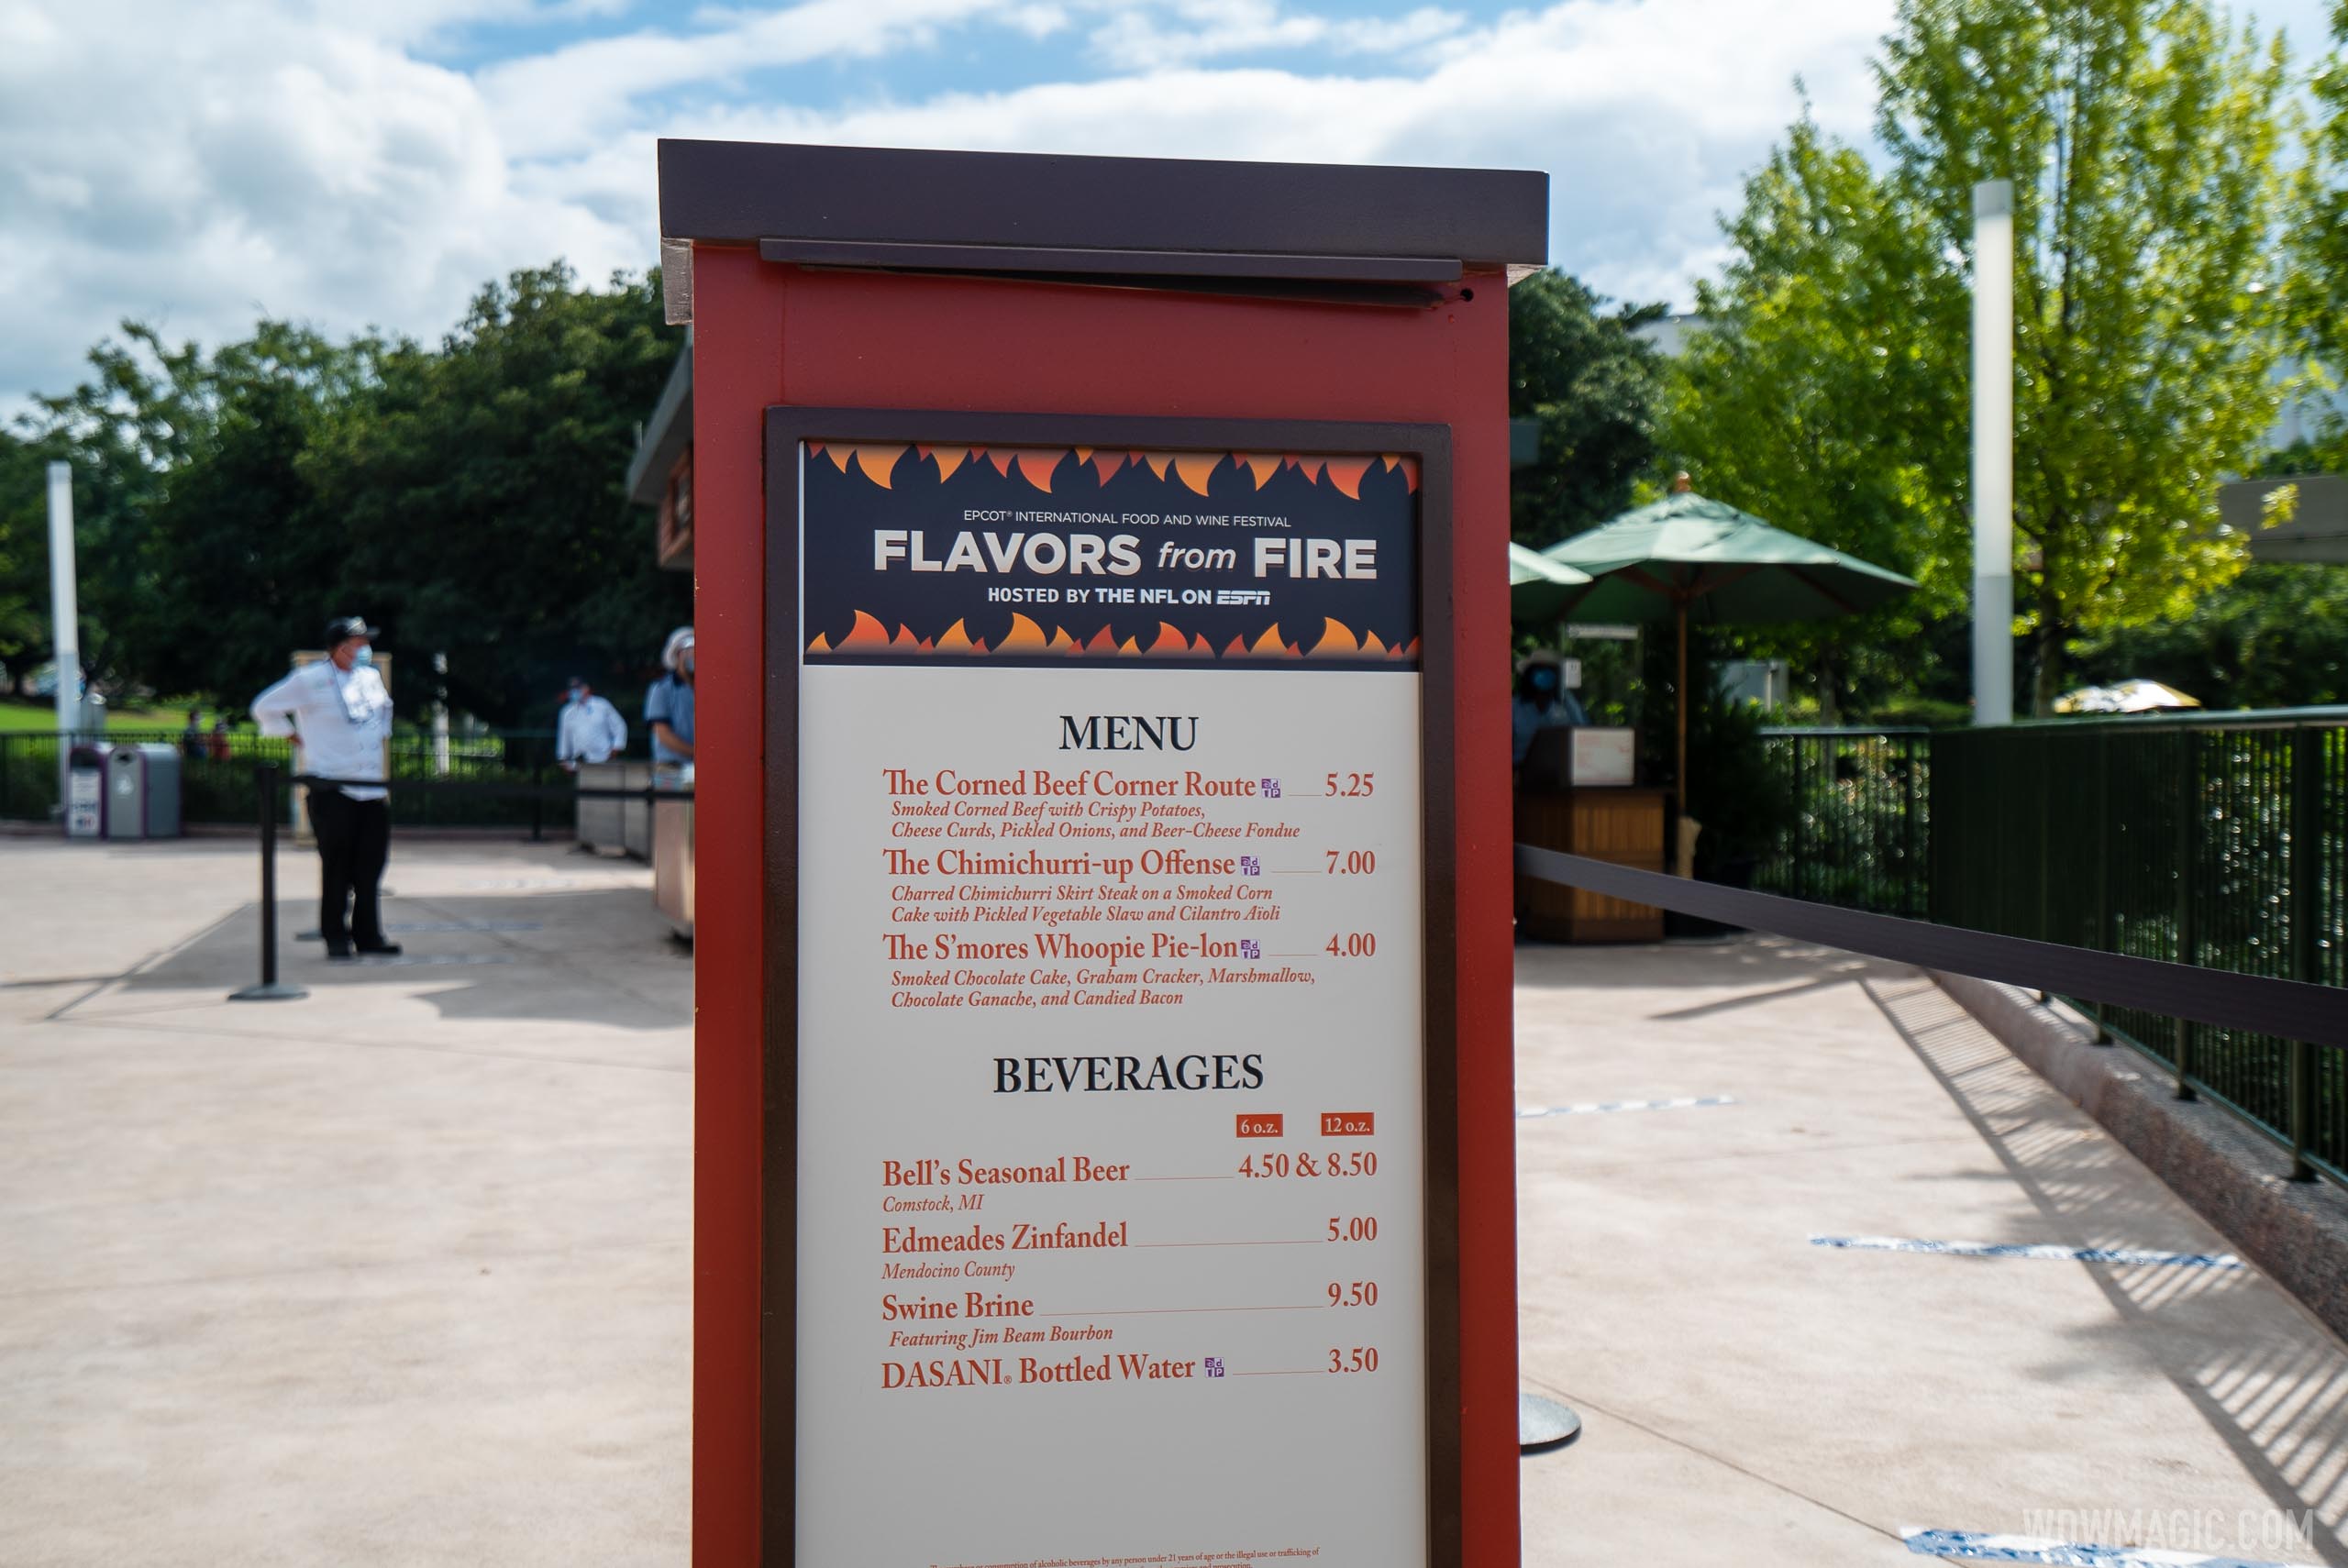 Flavors from Fire at 2020 Taste of EPCOT International Food and Wine Festival - Photo 4 of 4